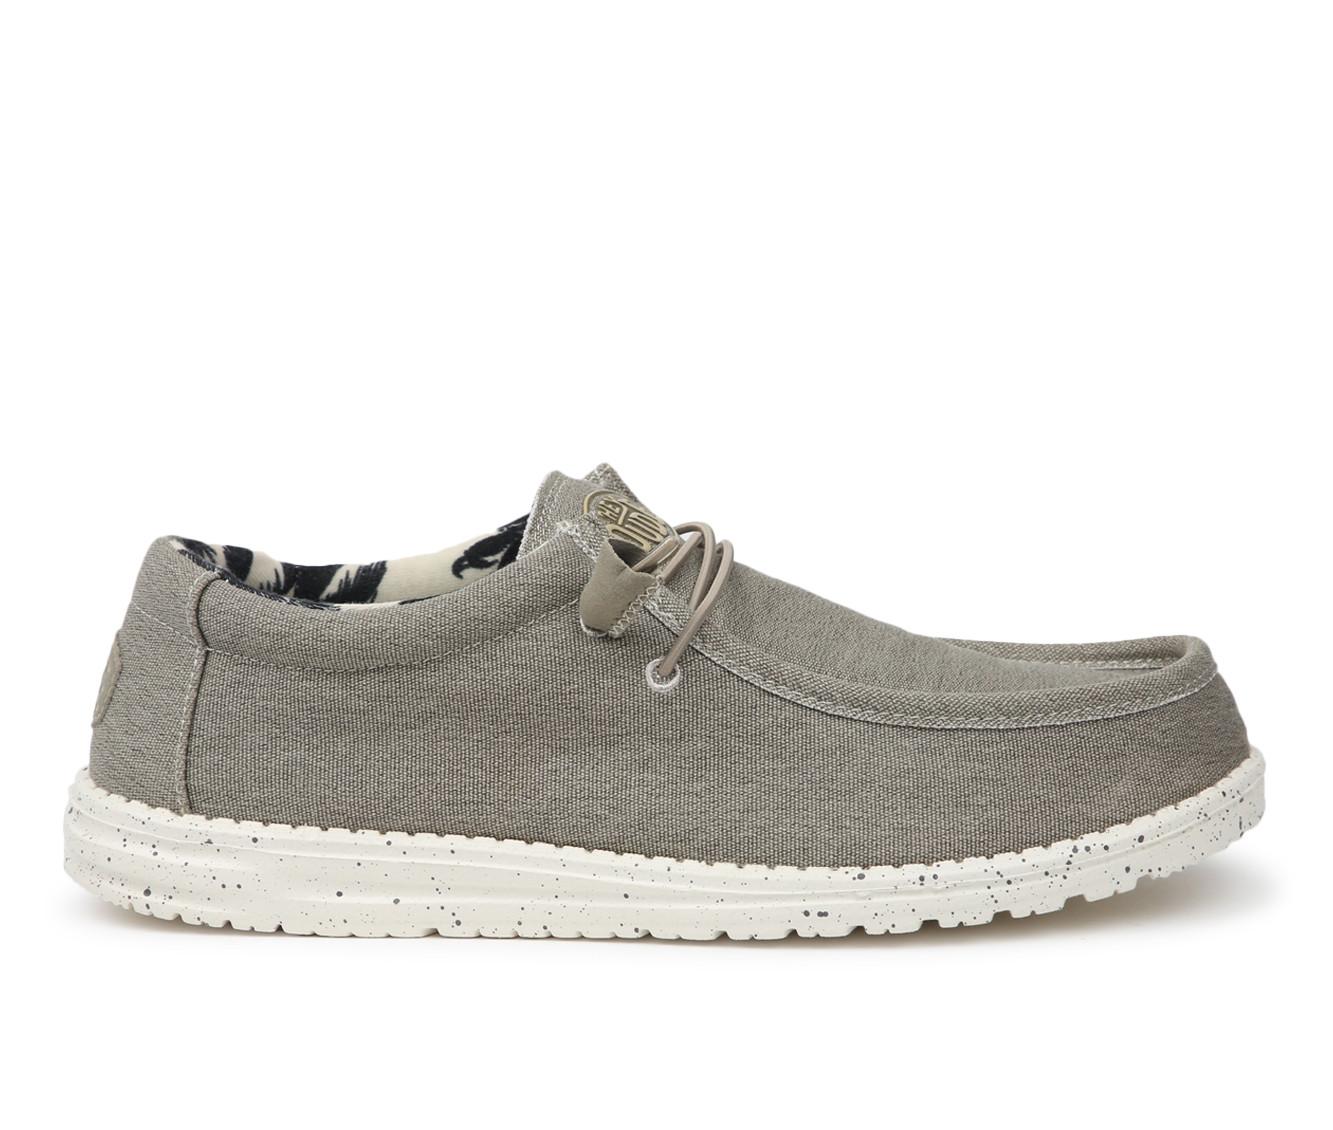 Men's HEYDUDE Wally Stretch Canvas Casual Shoes